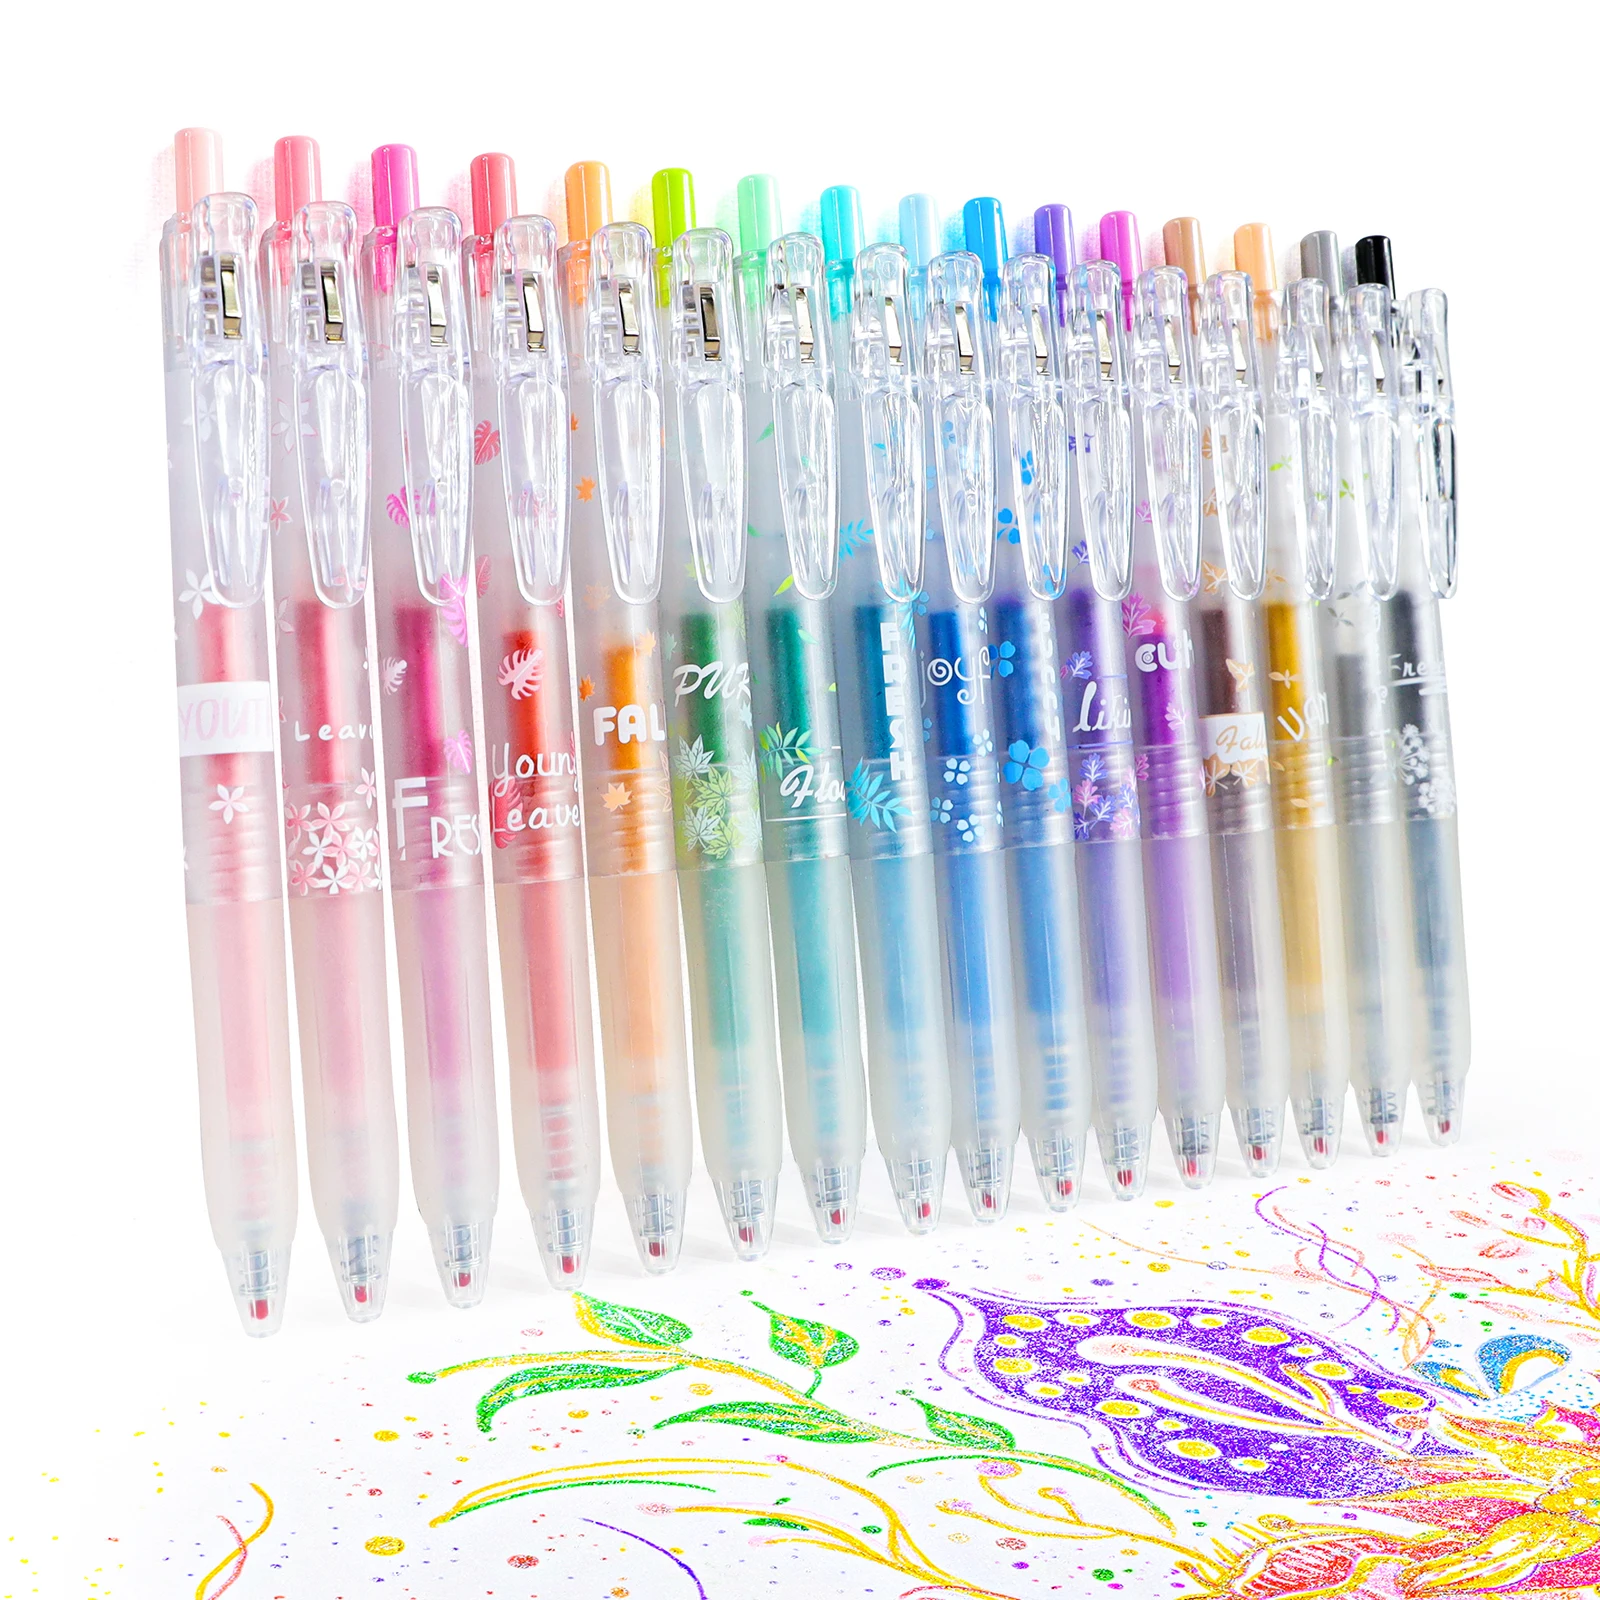 

Glitter Gel Pens 16 Assorted Pastel Color 0.7mm Retractable Colored Sparkle Glitter Pen Set for Adults Kids Journaling Coloring